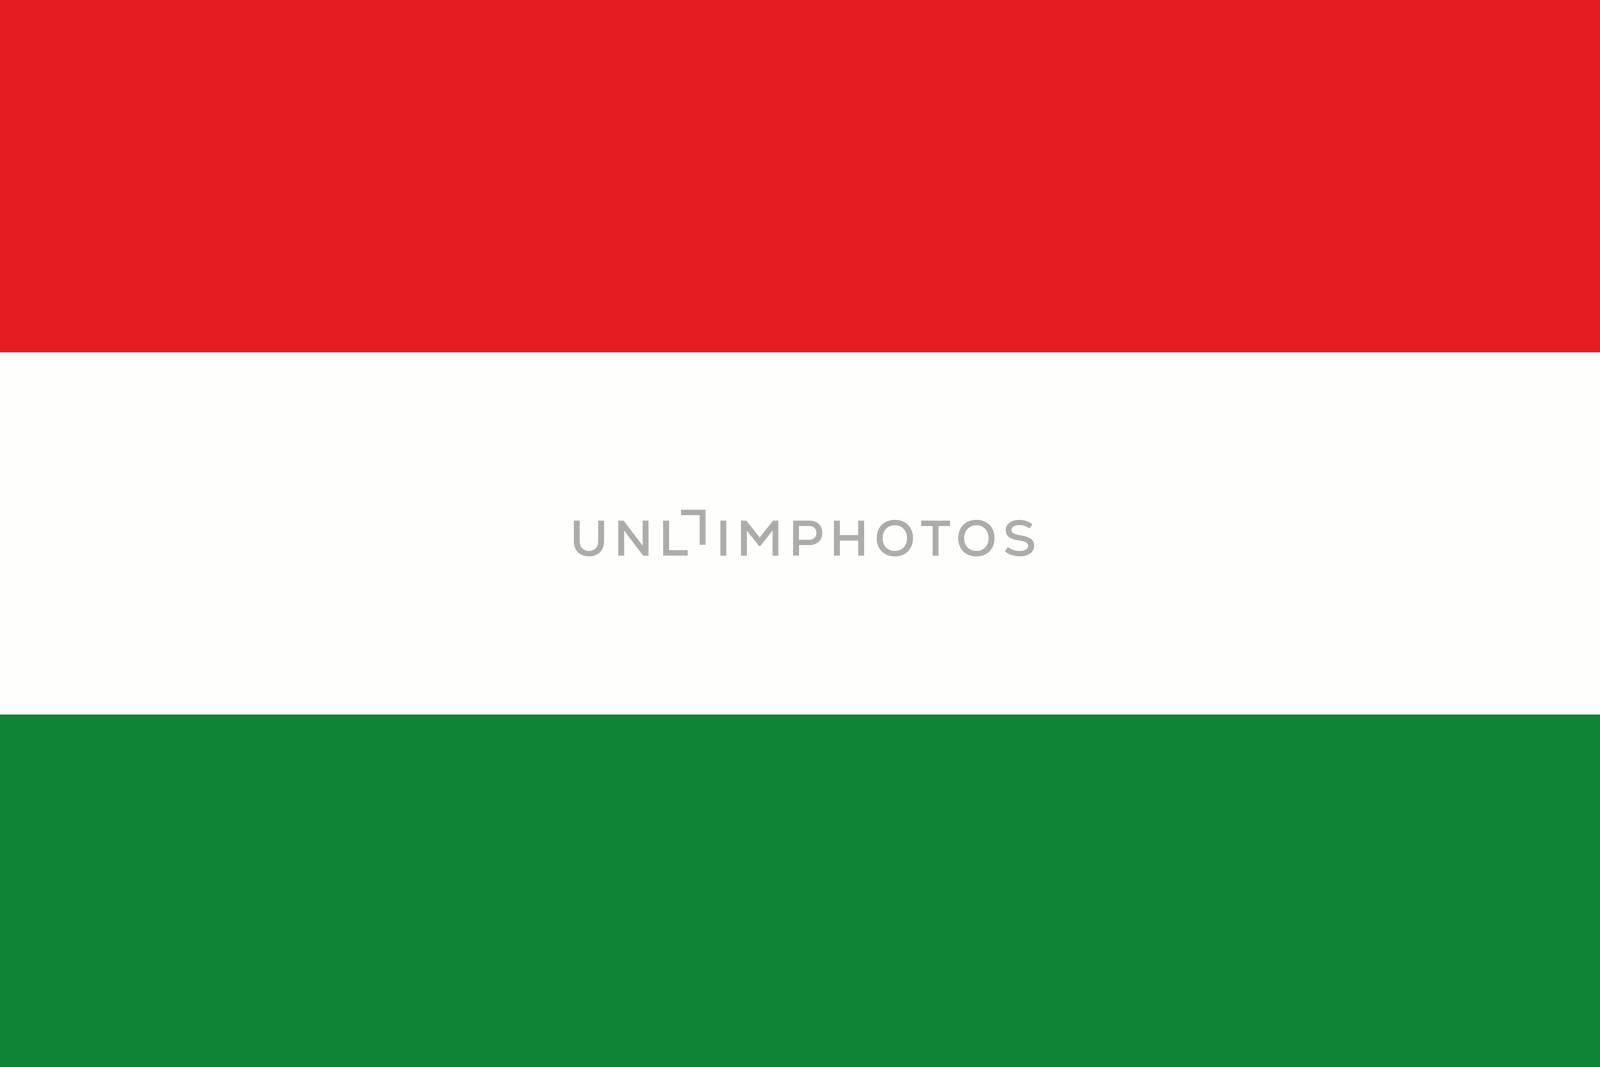 An illustration of the flag of Hungary